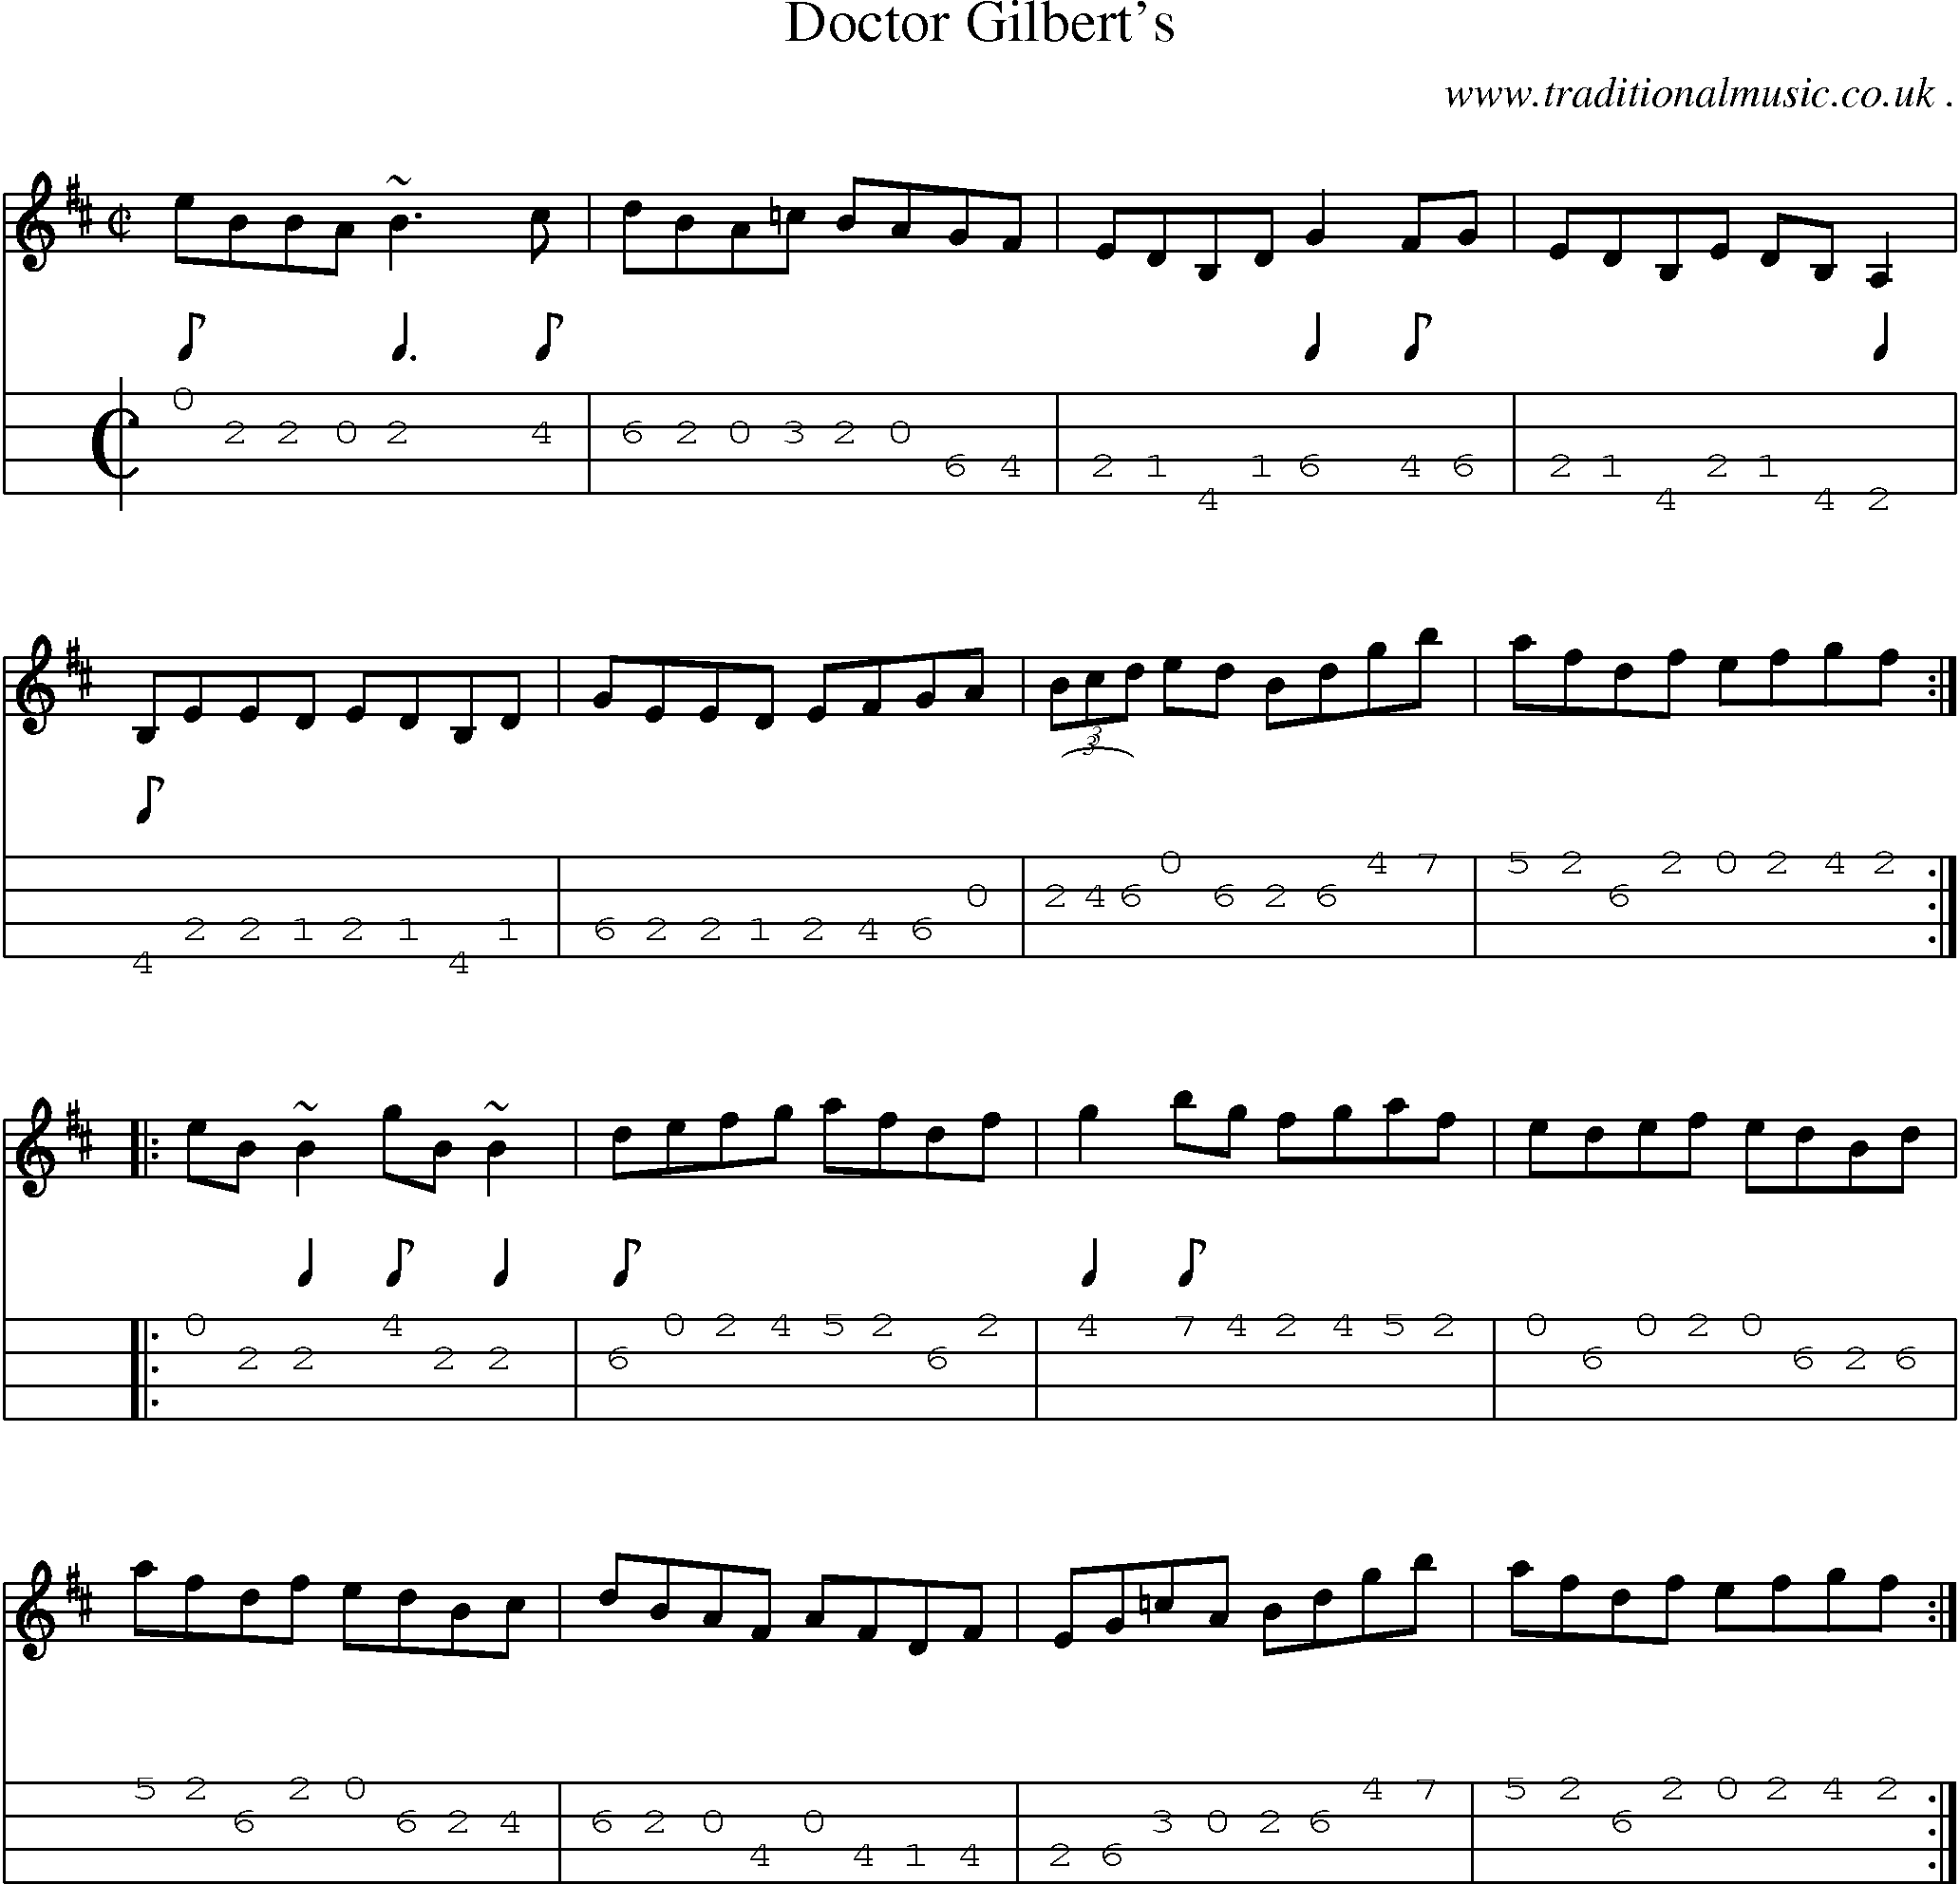 Sheet-music  score, Chords and Mandolin Tabs for Doctor Gilberts